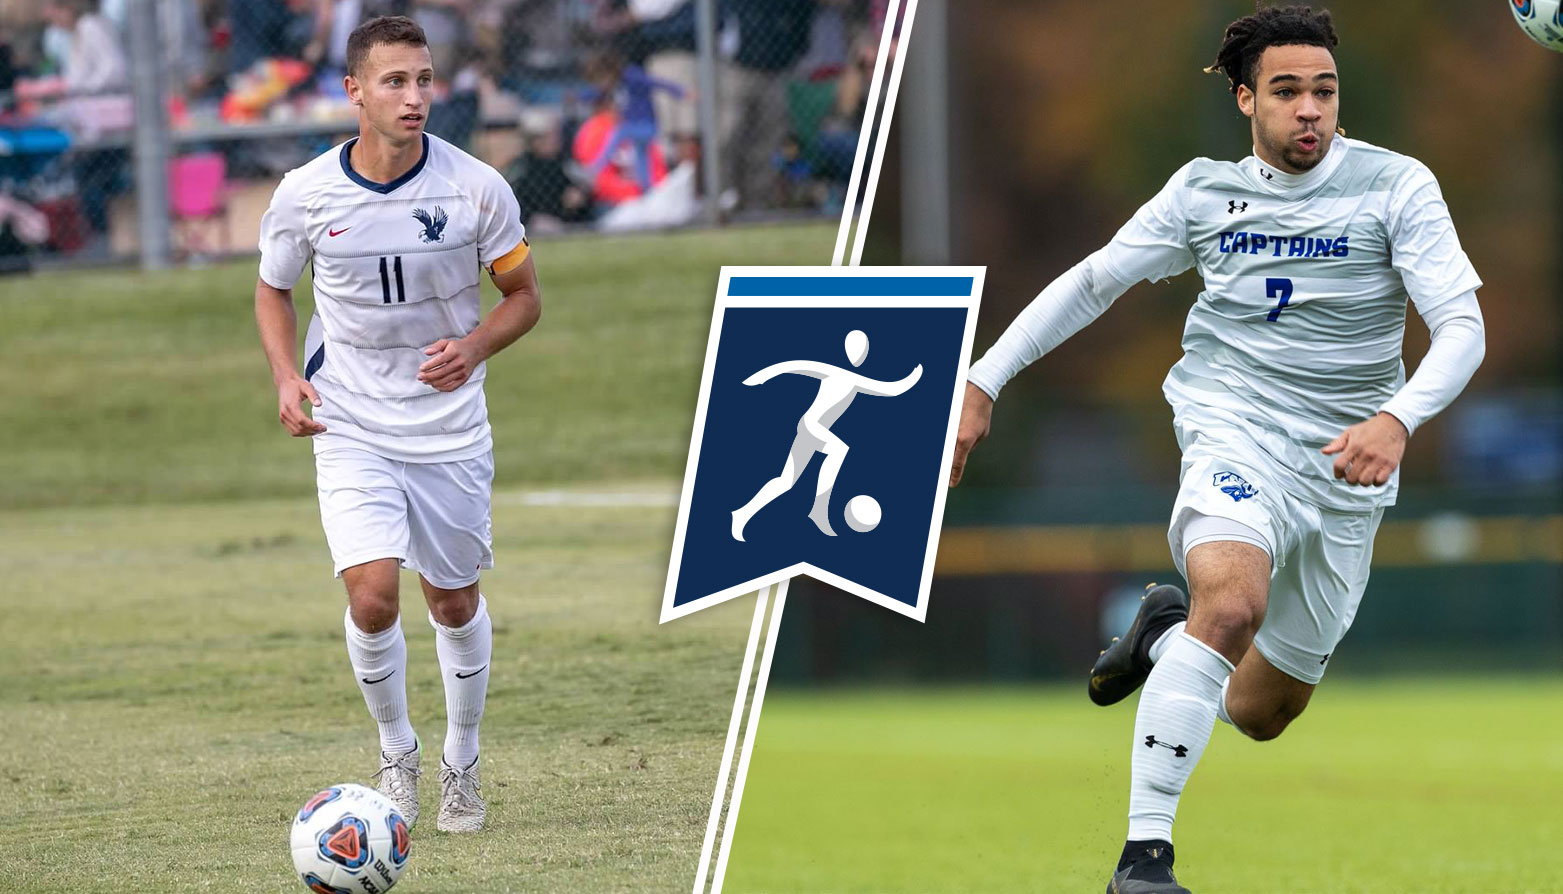 Eagles & Captains Blank Opposition, Advance to NCAA Men's Soccer Second Round